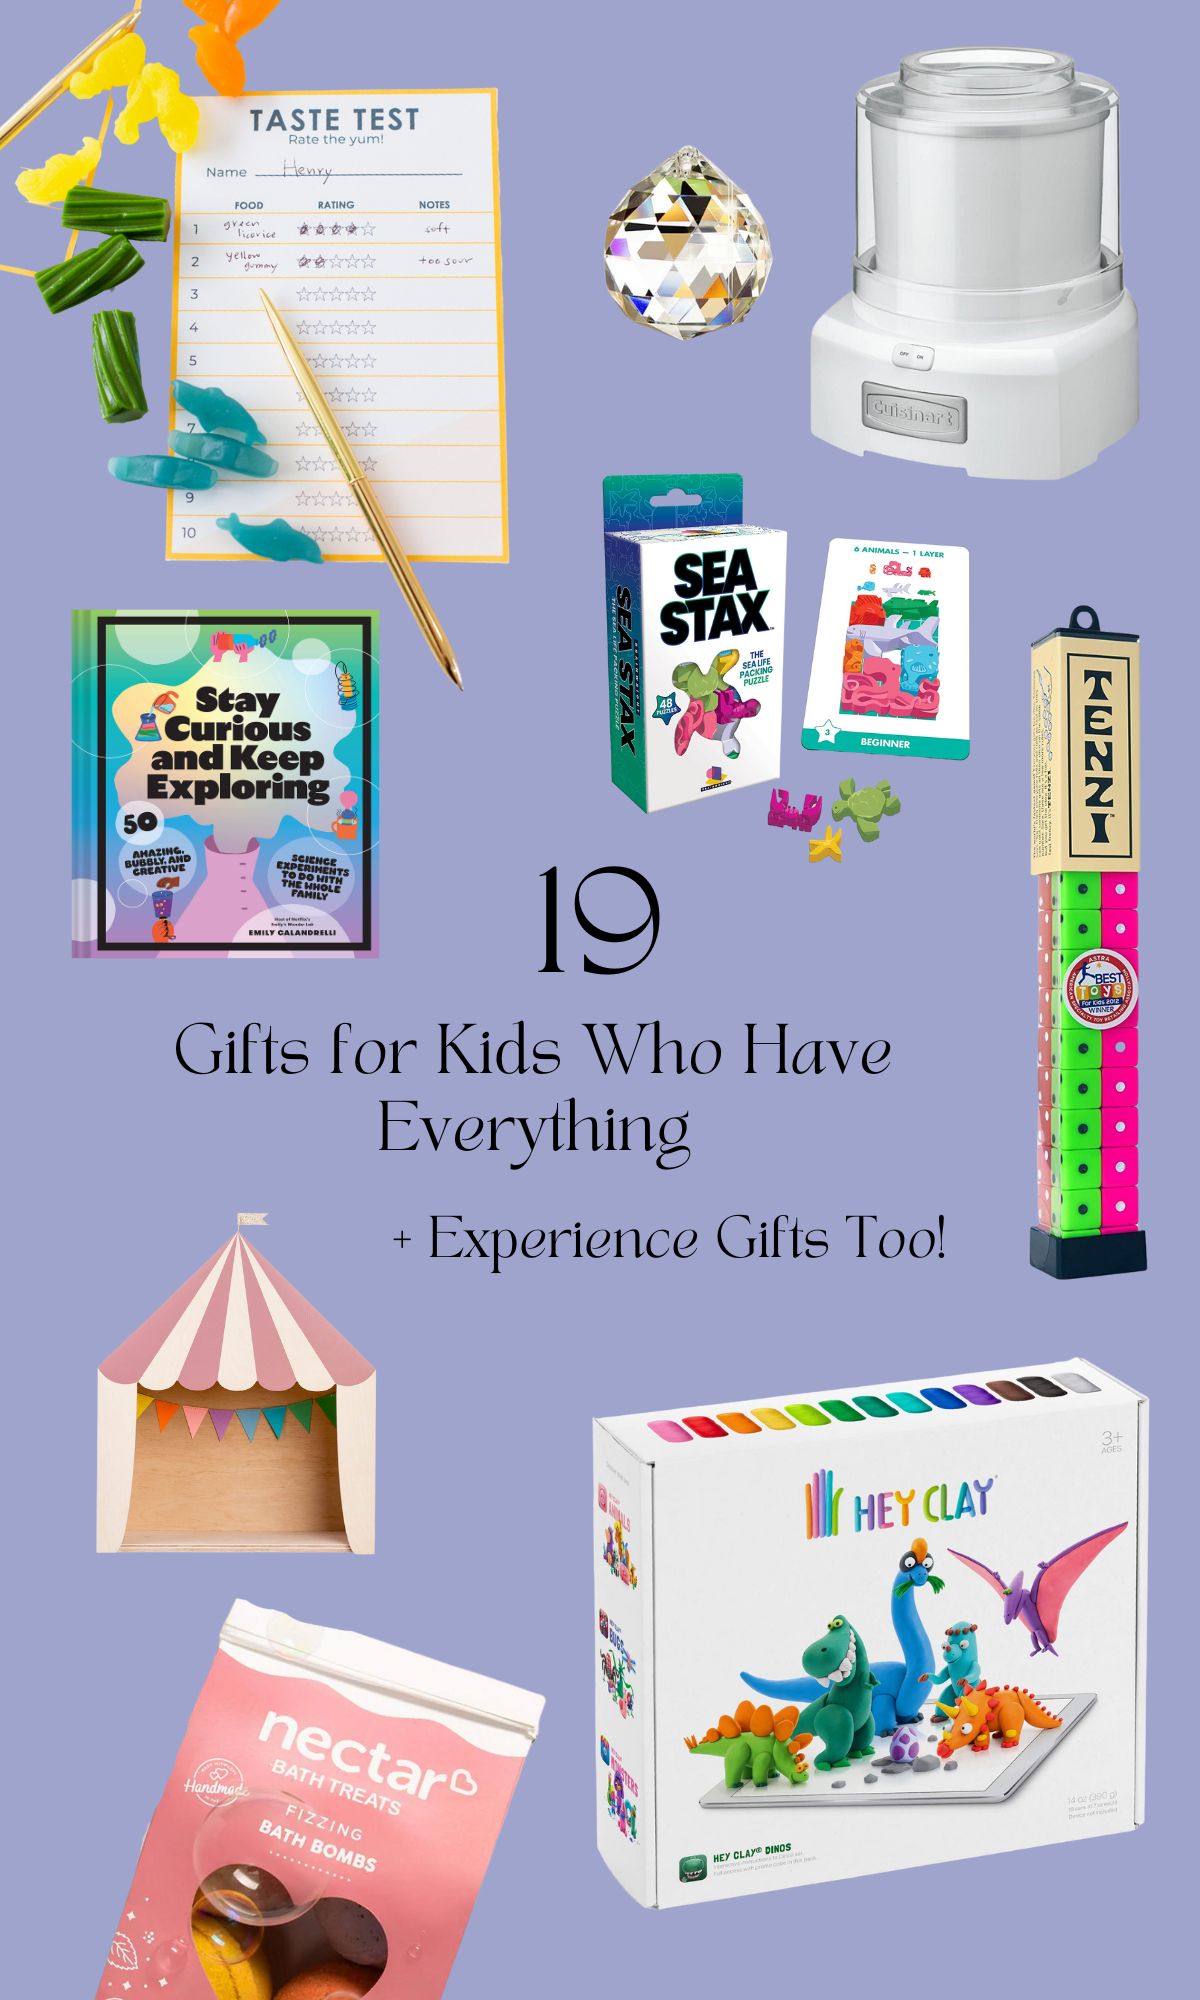 5 DIY Cardboard Games Your Kids Will Love  Children are always excited to  get presents - especially toys. But don't think that every toy needs to be  off the shelf. There's